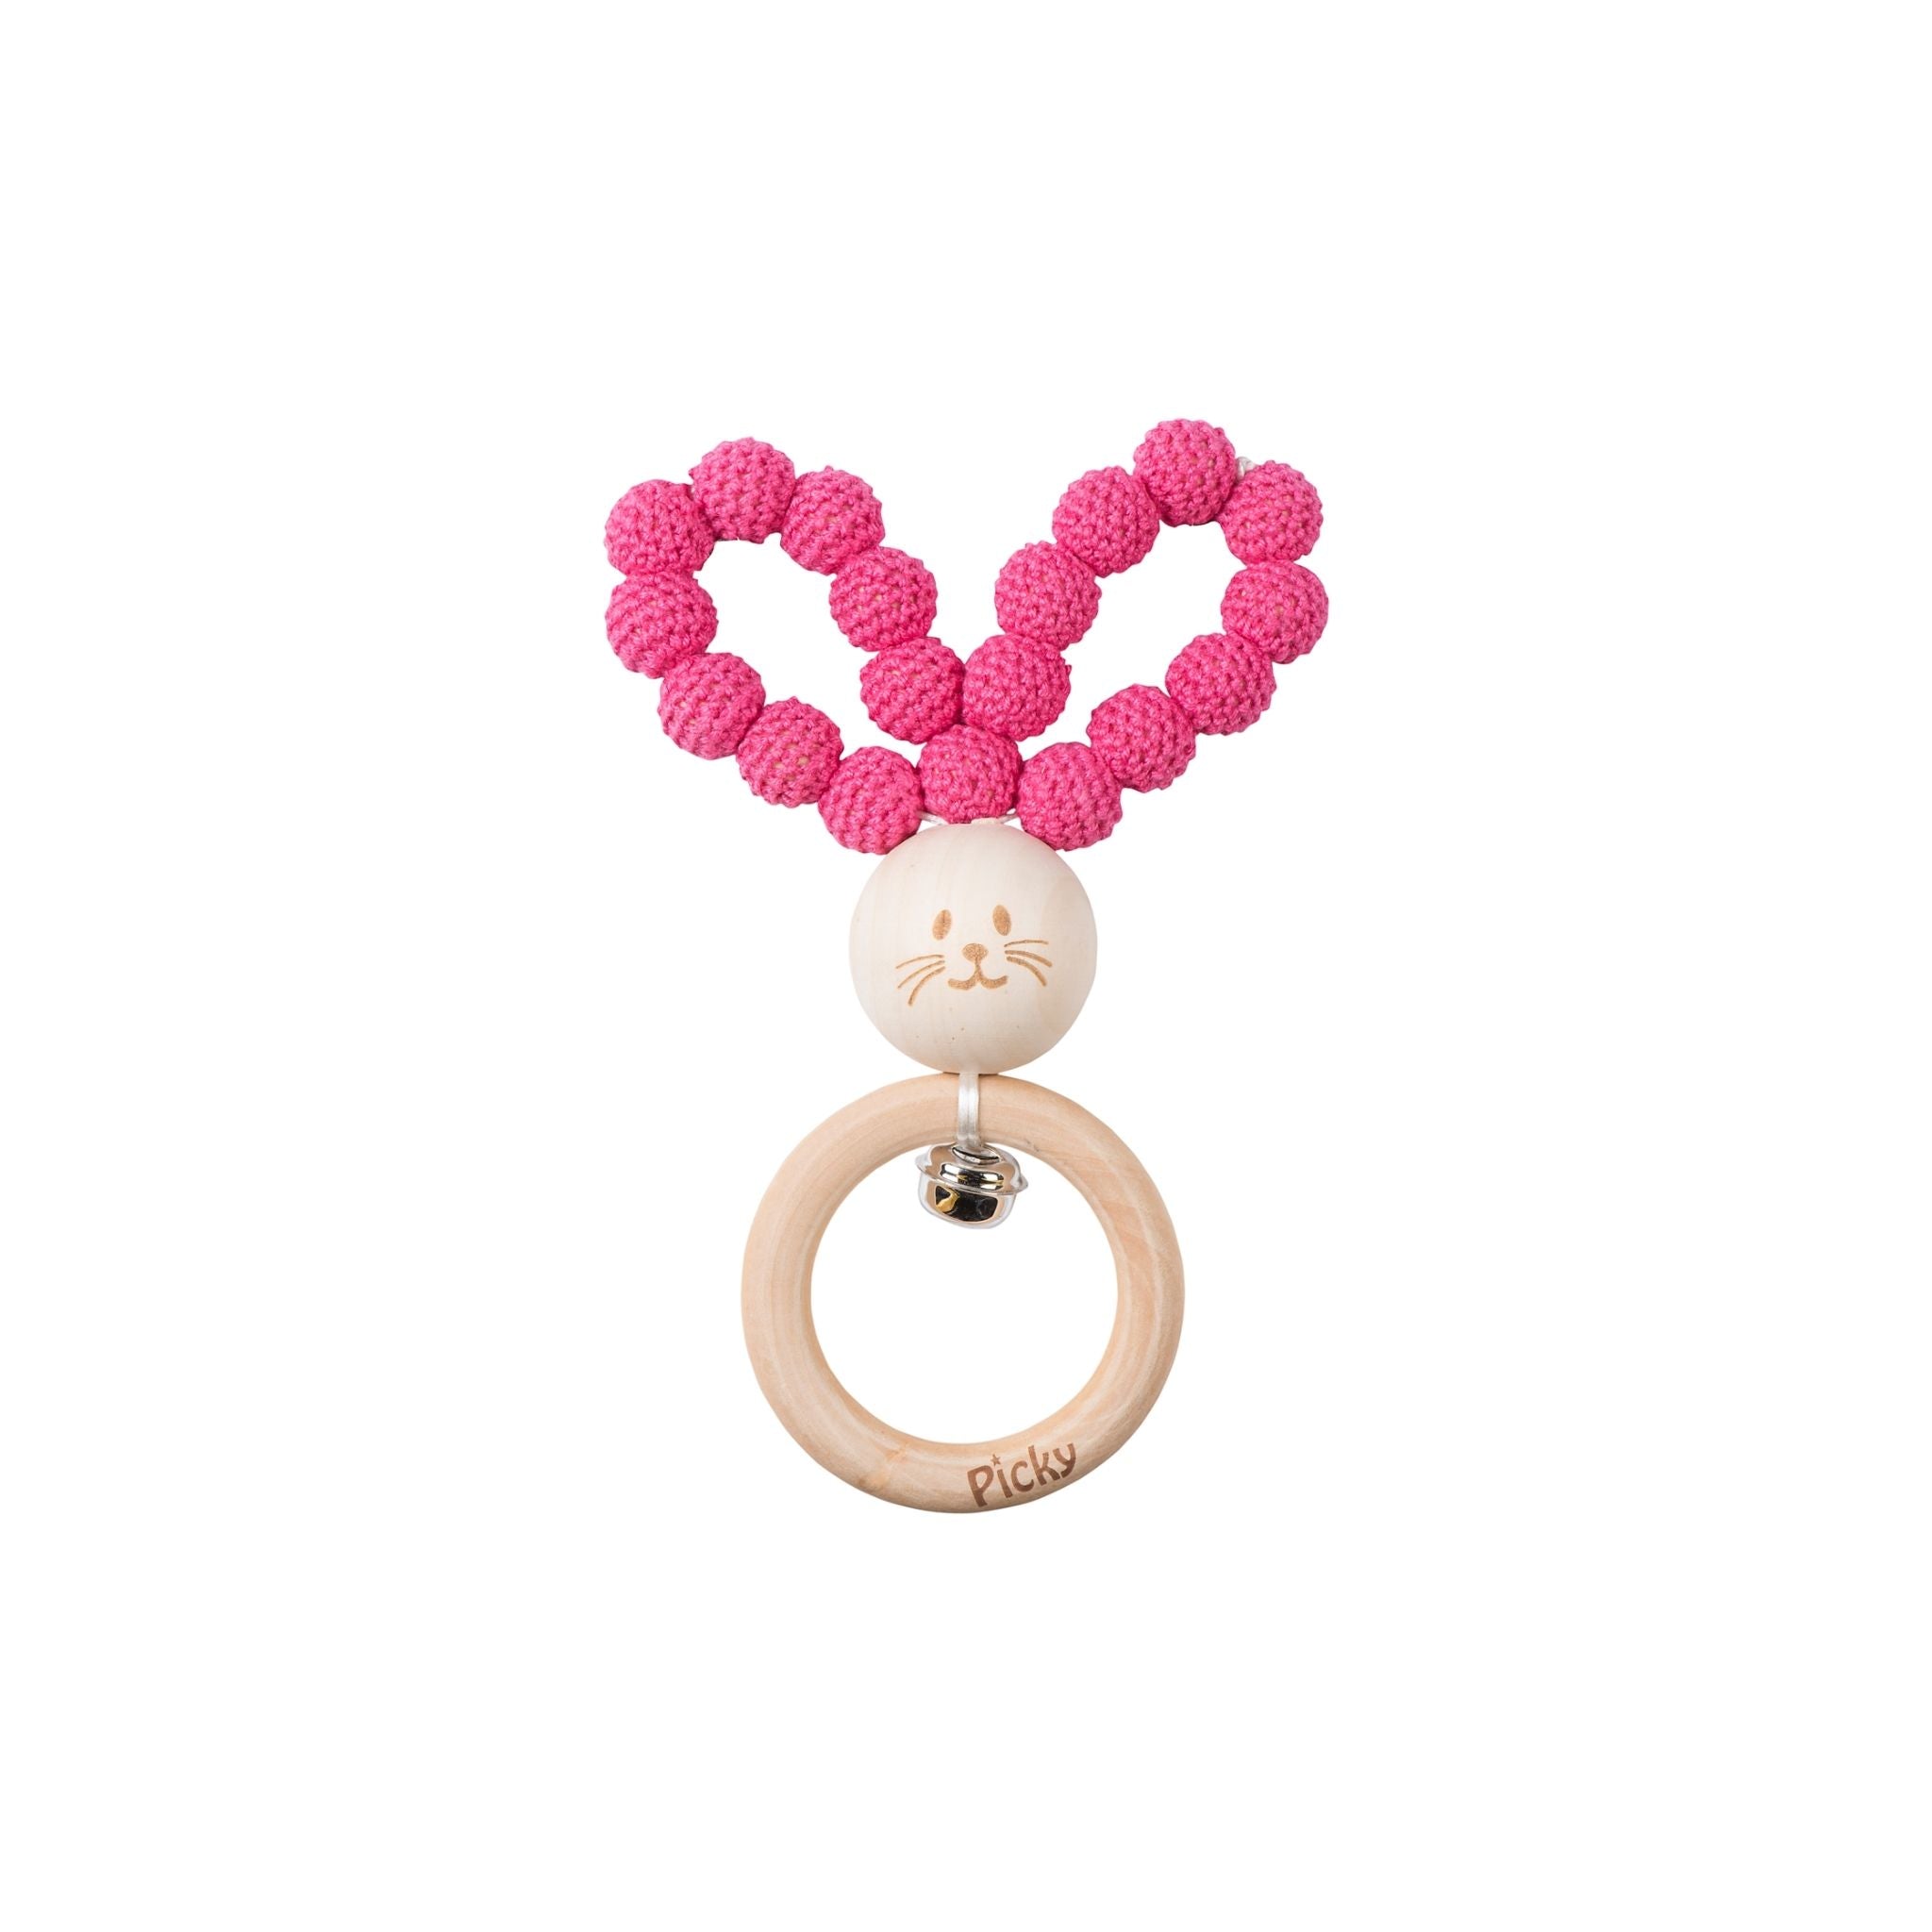 Picky Crochet Bunny Teether - Hot Pink